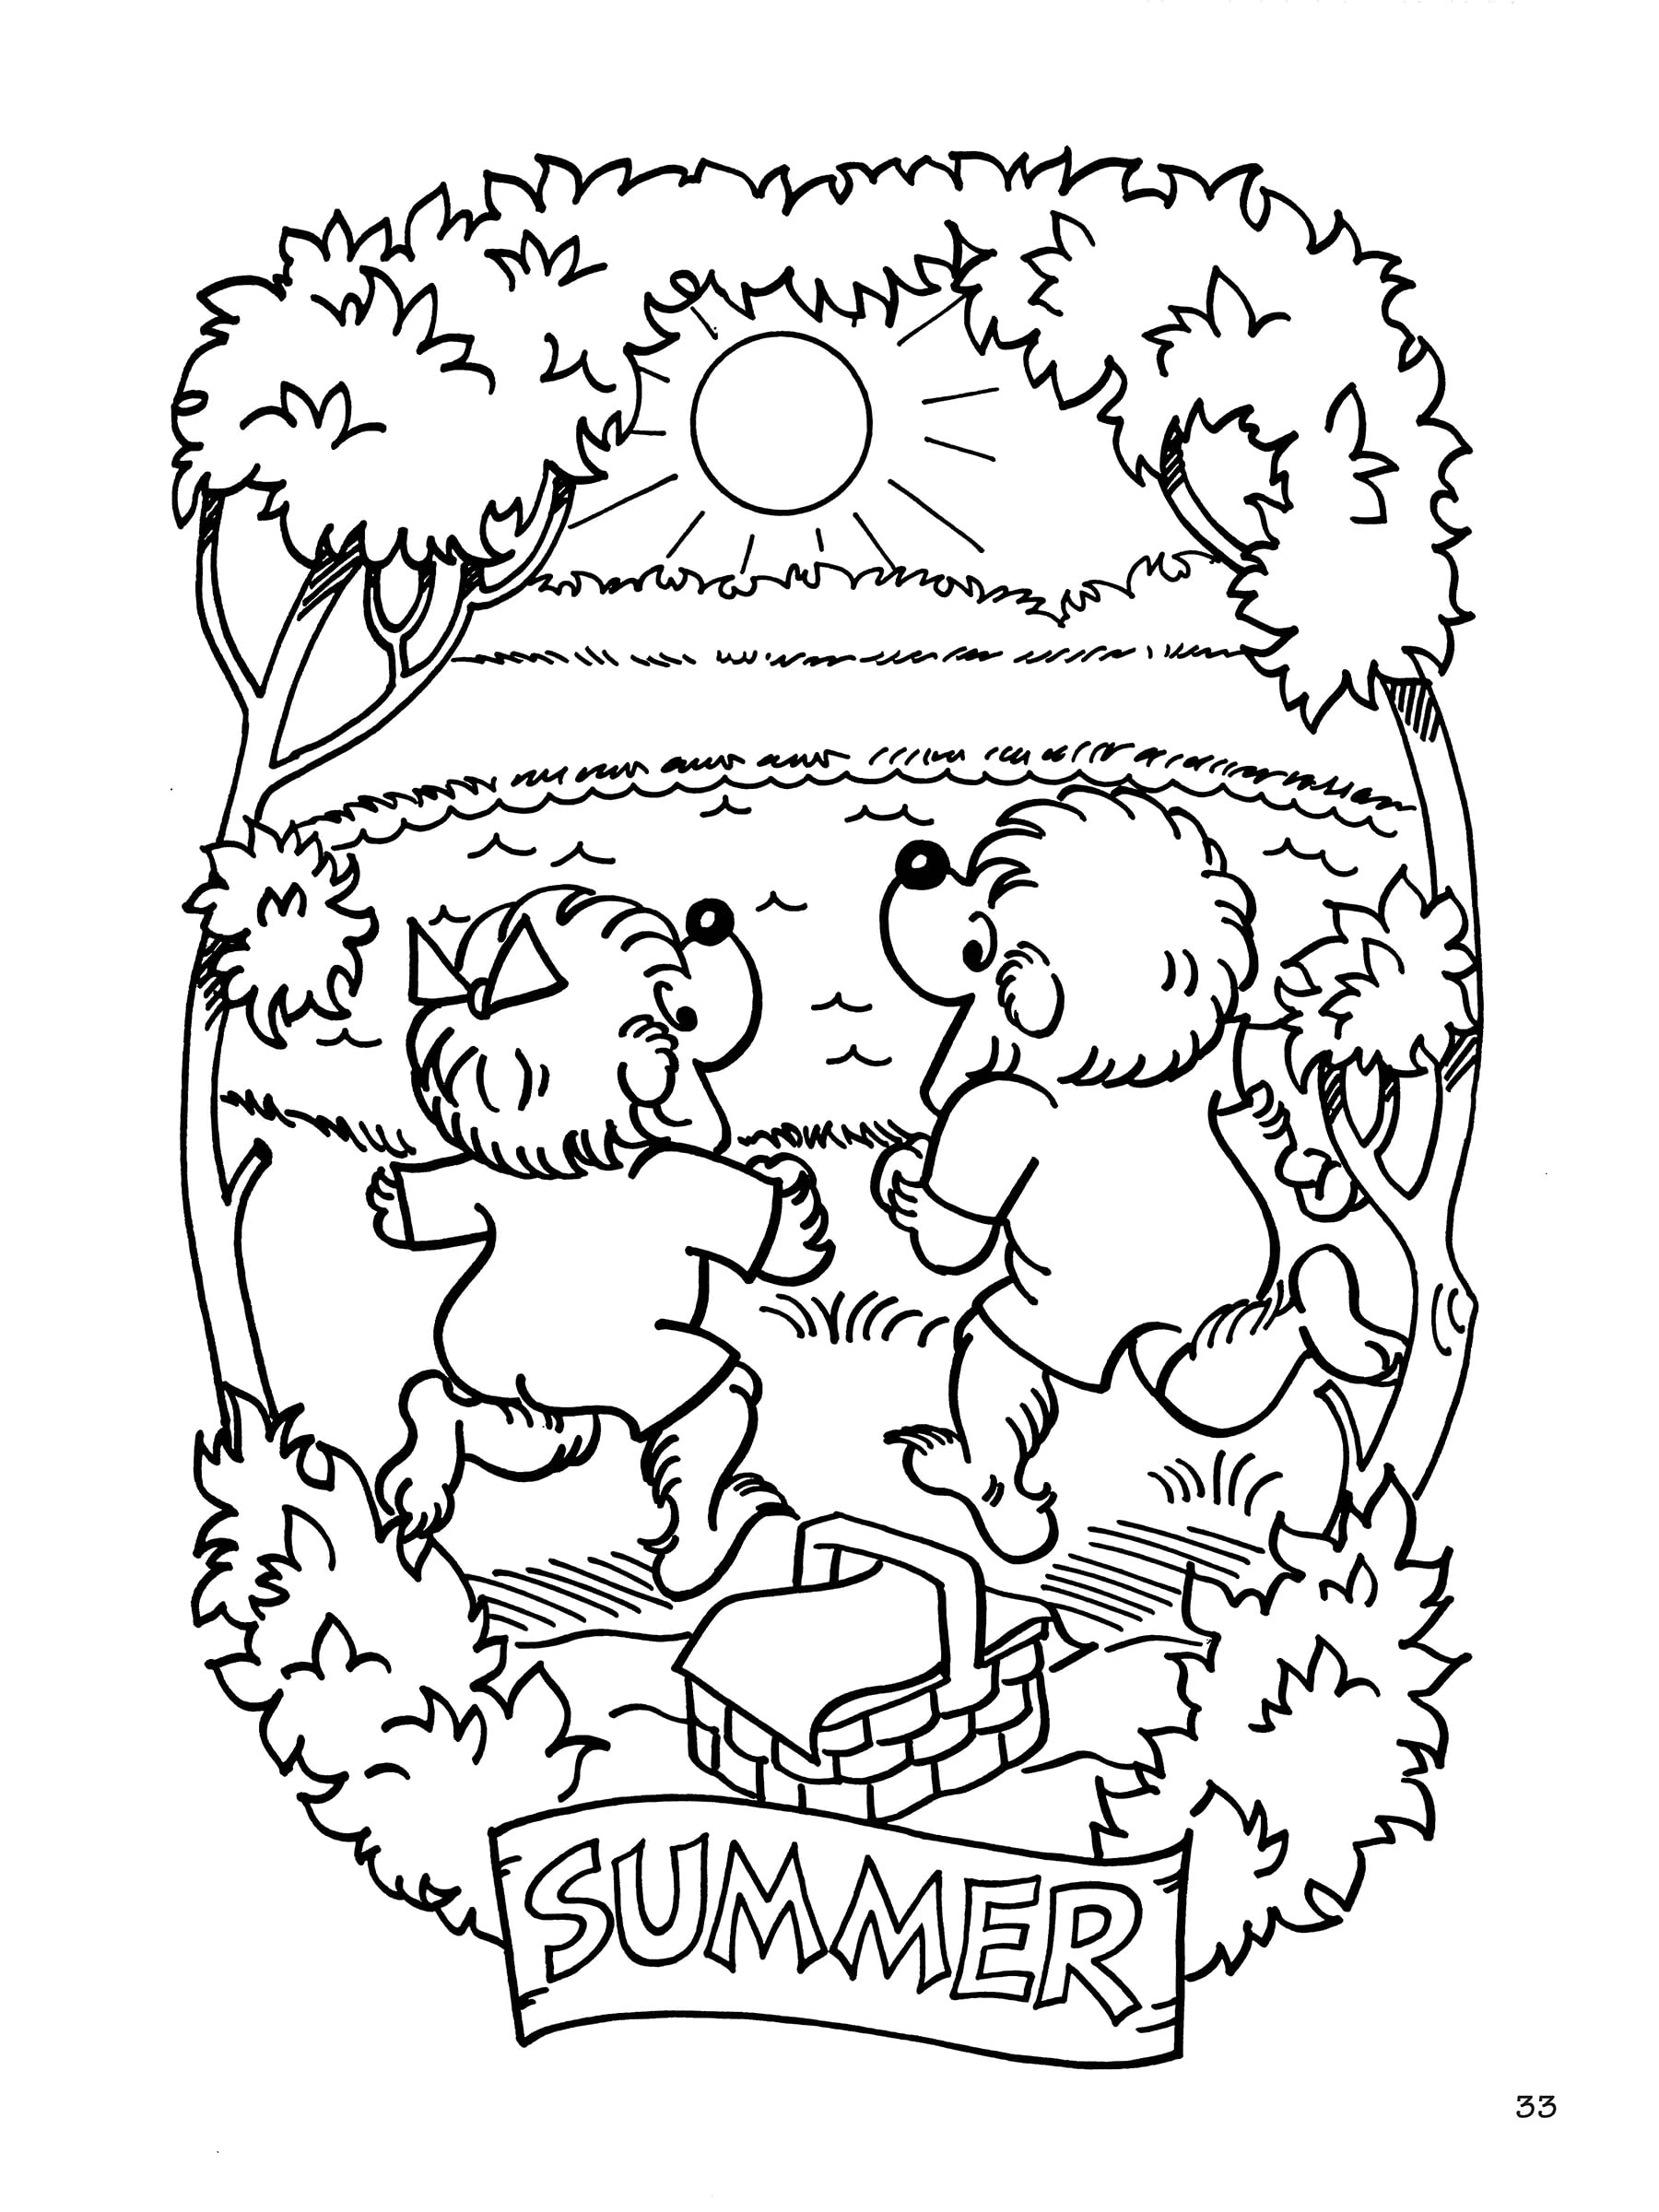 The Berenstain Bears' Giant Coloring and Activity Book (Dover Kids Activity Books)